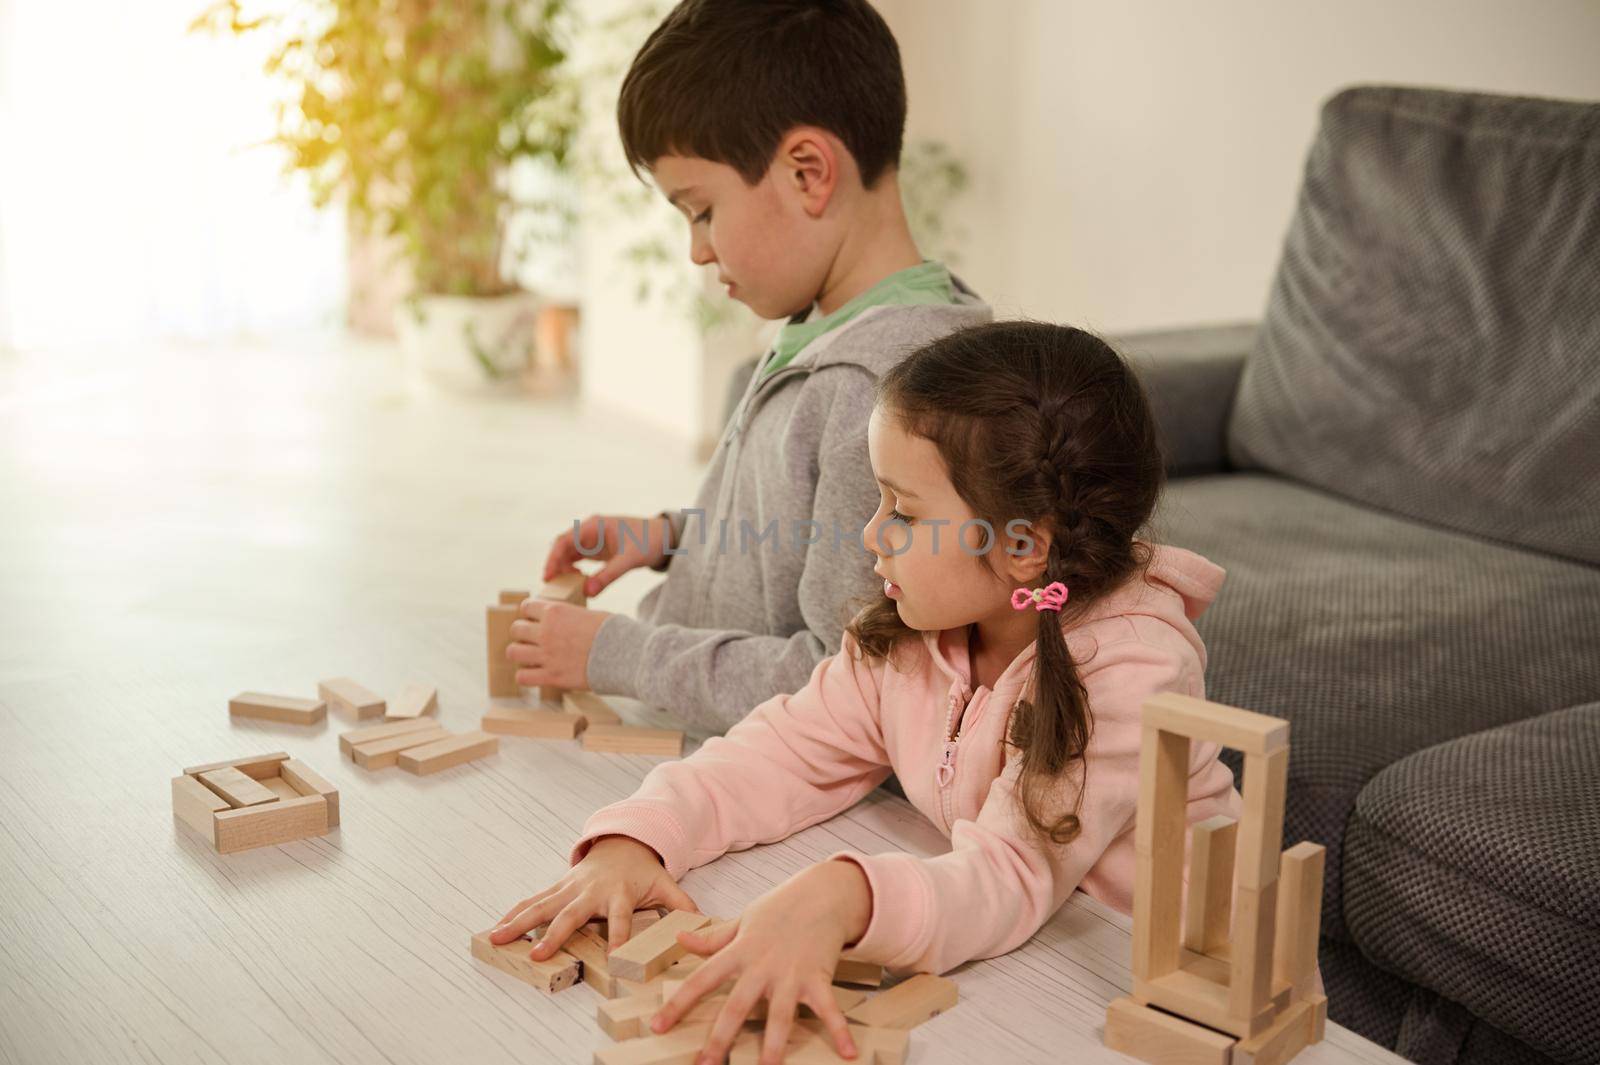 Curious adorable Caucasian girl inspecting her brother's wooden block buildings - childhood activities, fine motors skill development concept. Brother and sister playing board games together at home